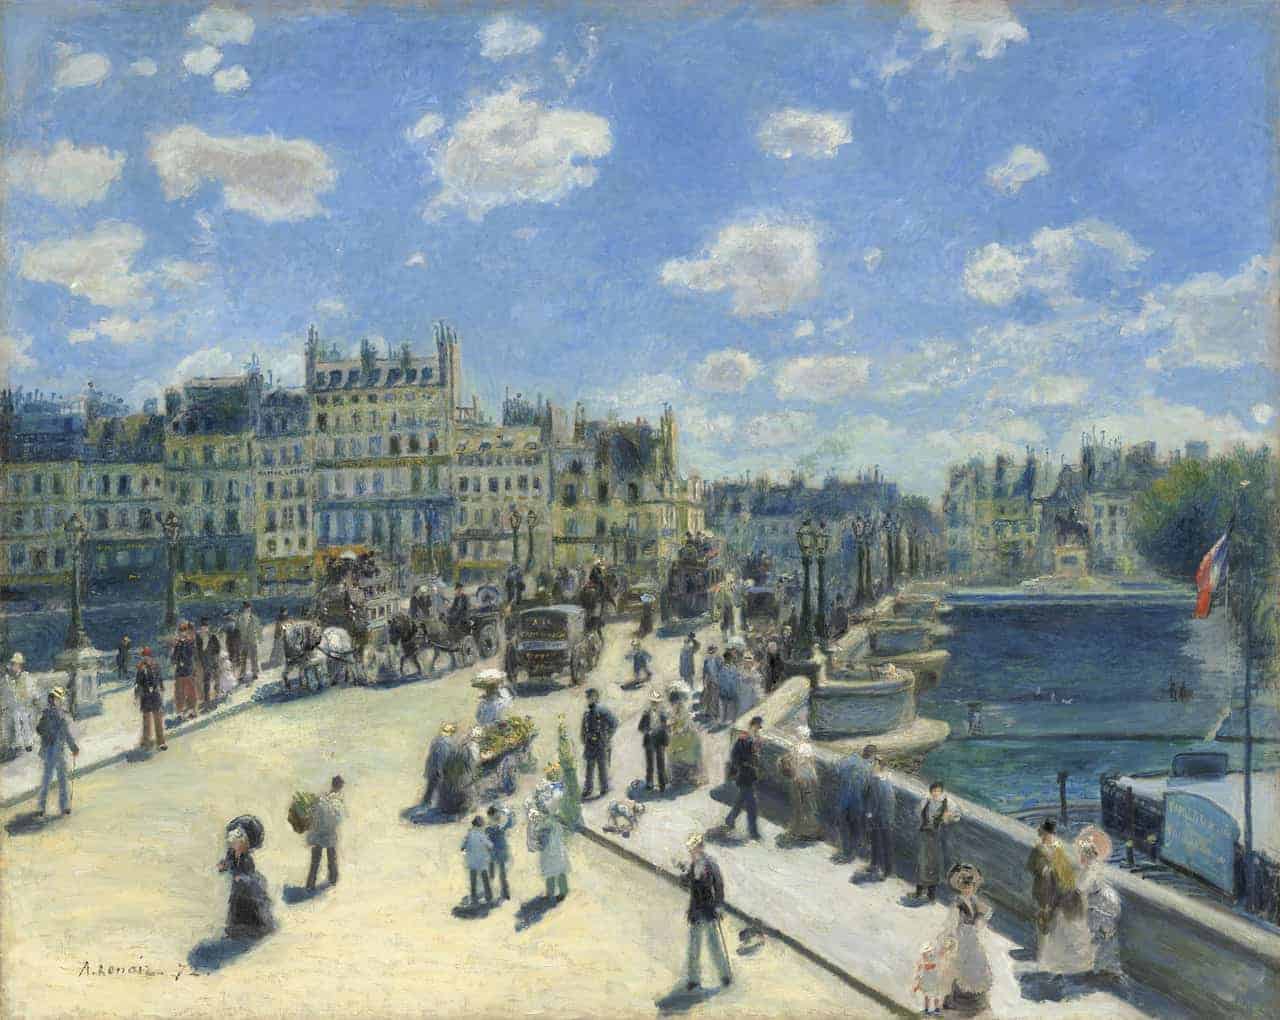 Pont Neuf, Paris, 1872, Auguste Renoir, Courtesy National Gallery of Art, Washington (article on ADHD in adults)